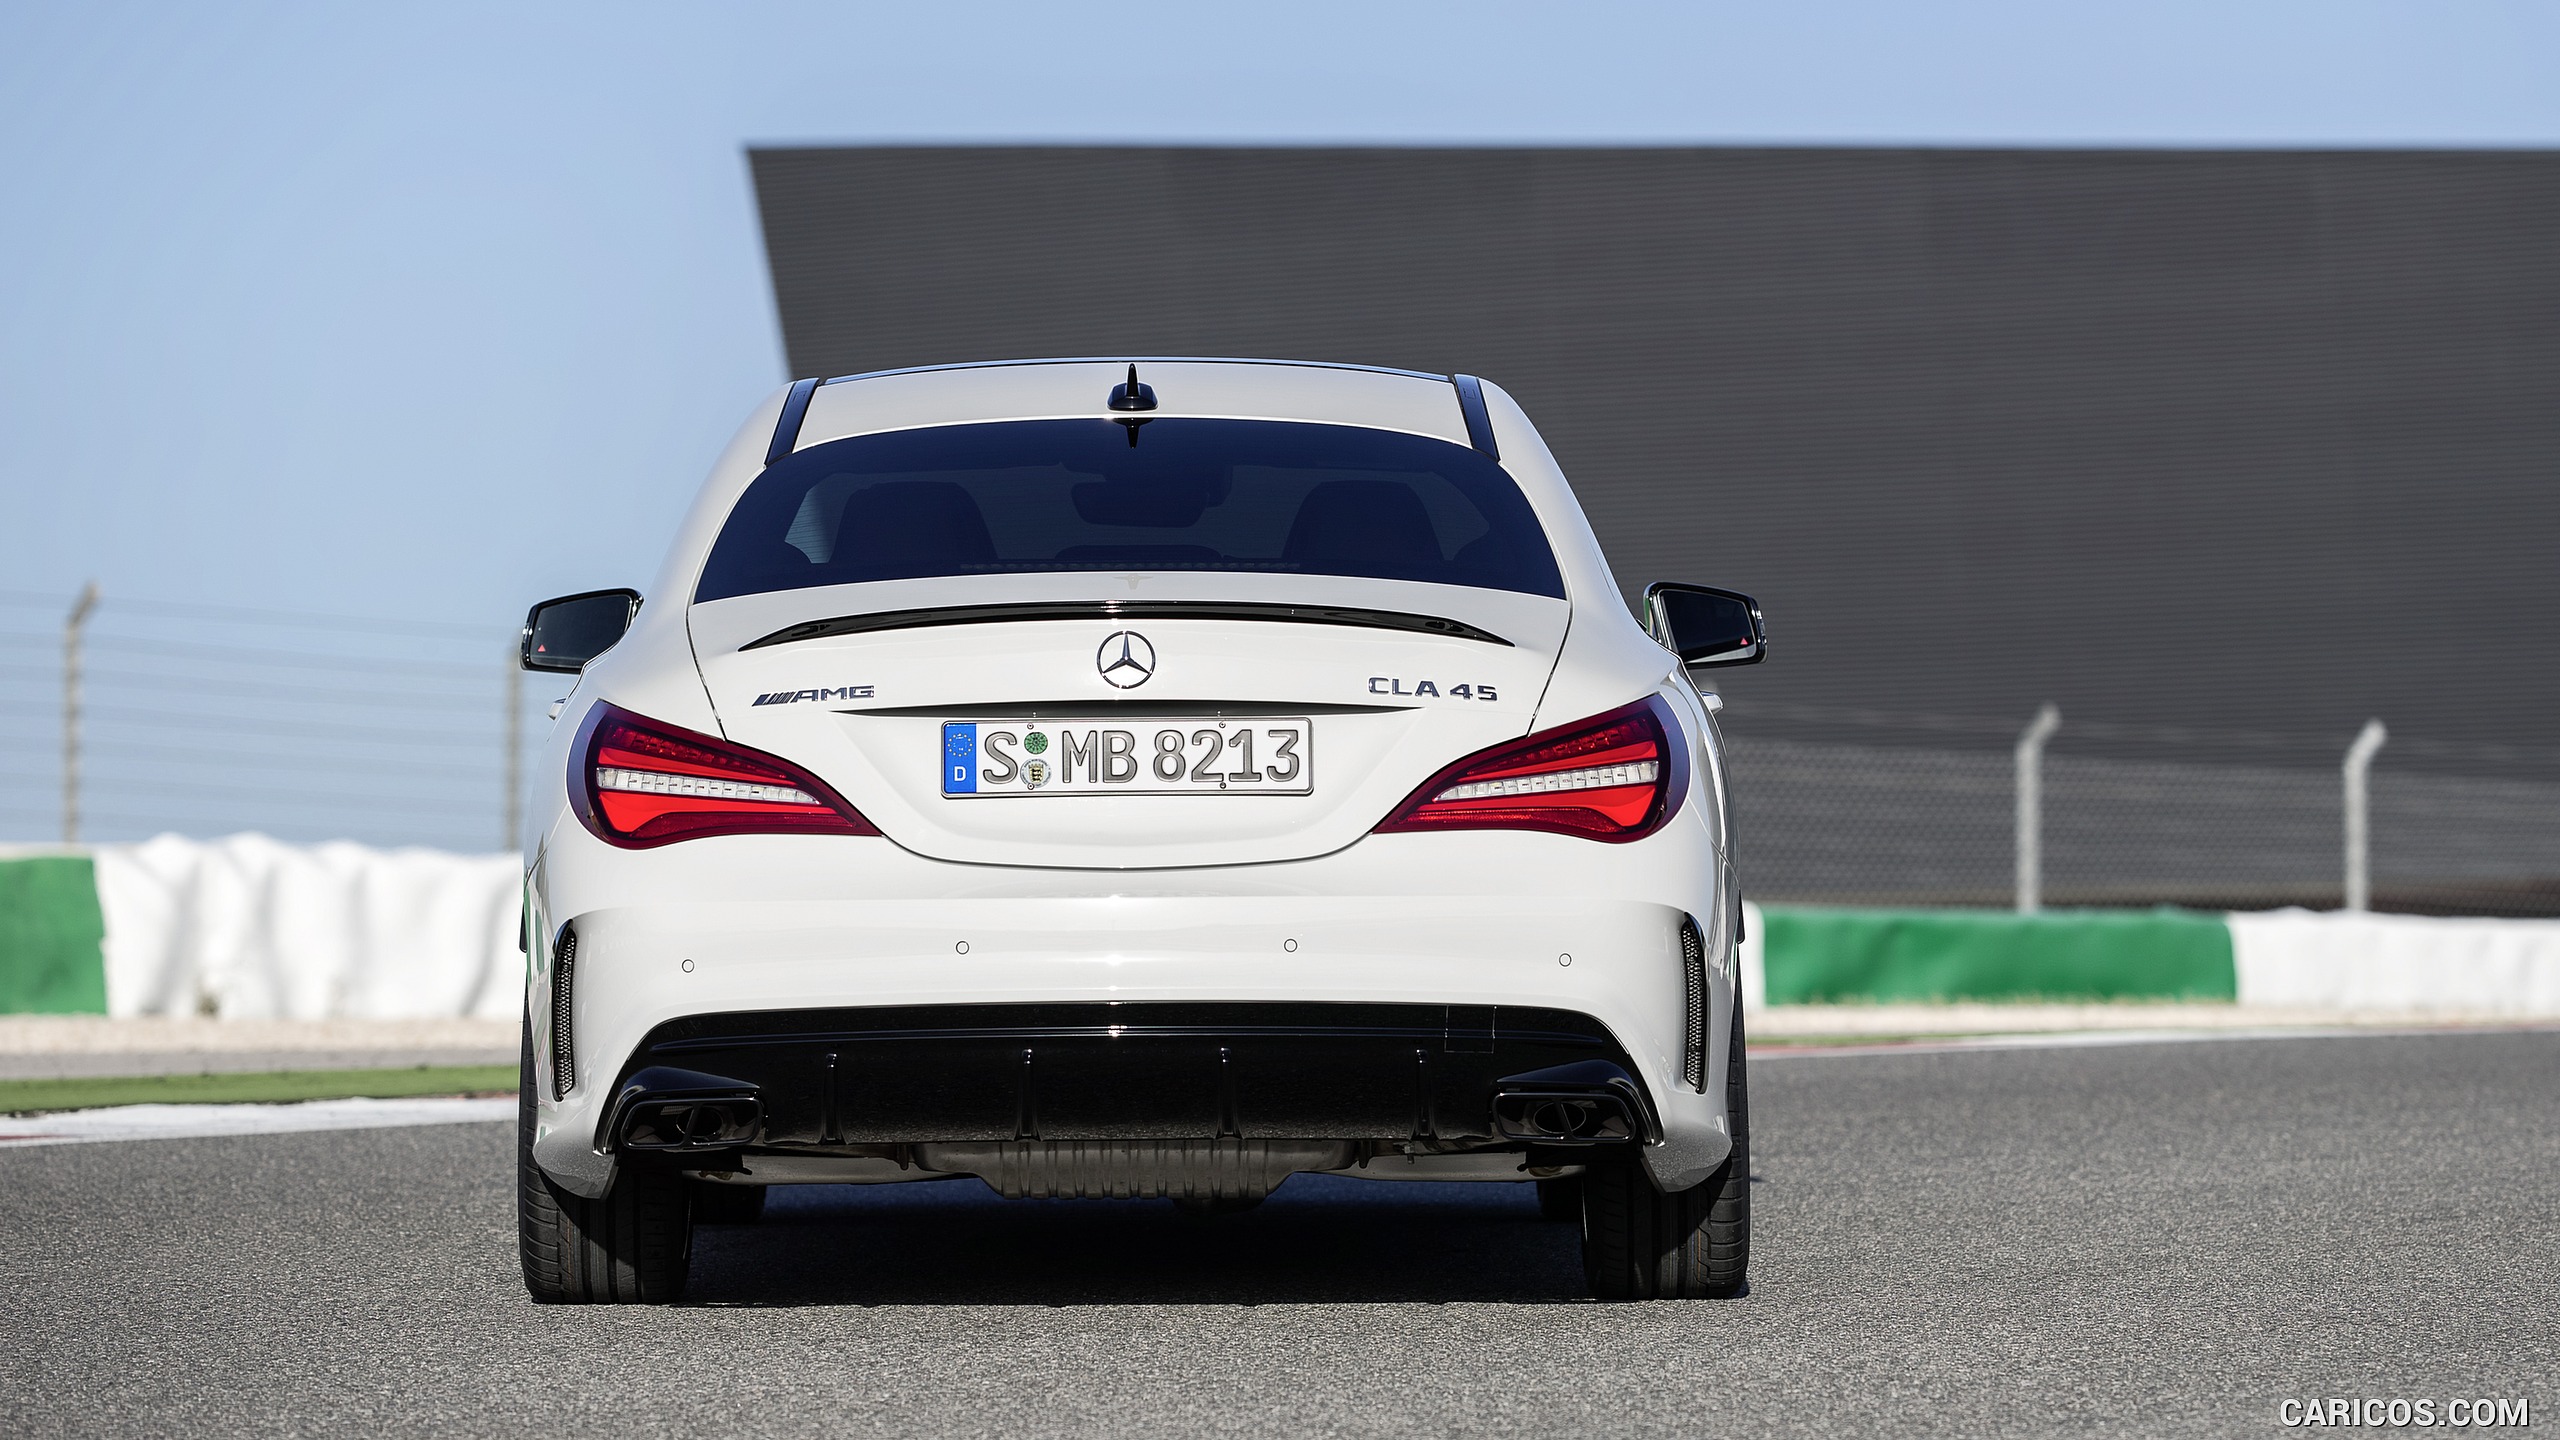 2017 Mercedes-AMG CLA 45 Coupé with Aerodynamics Package (Chassis: C117, Color: Diamond White) - Rear, #9 of 11